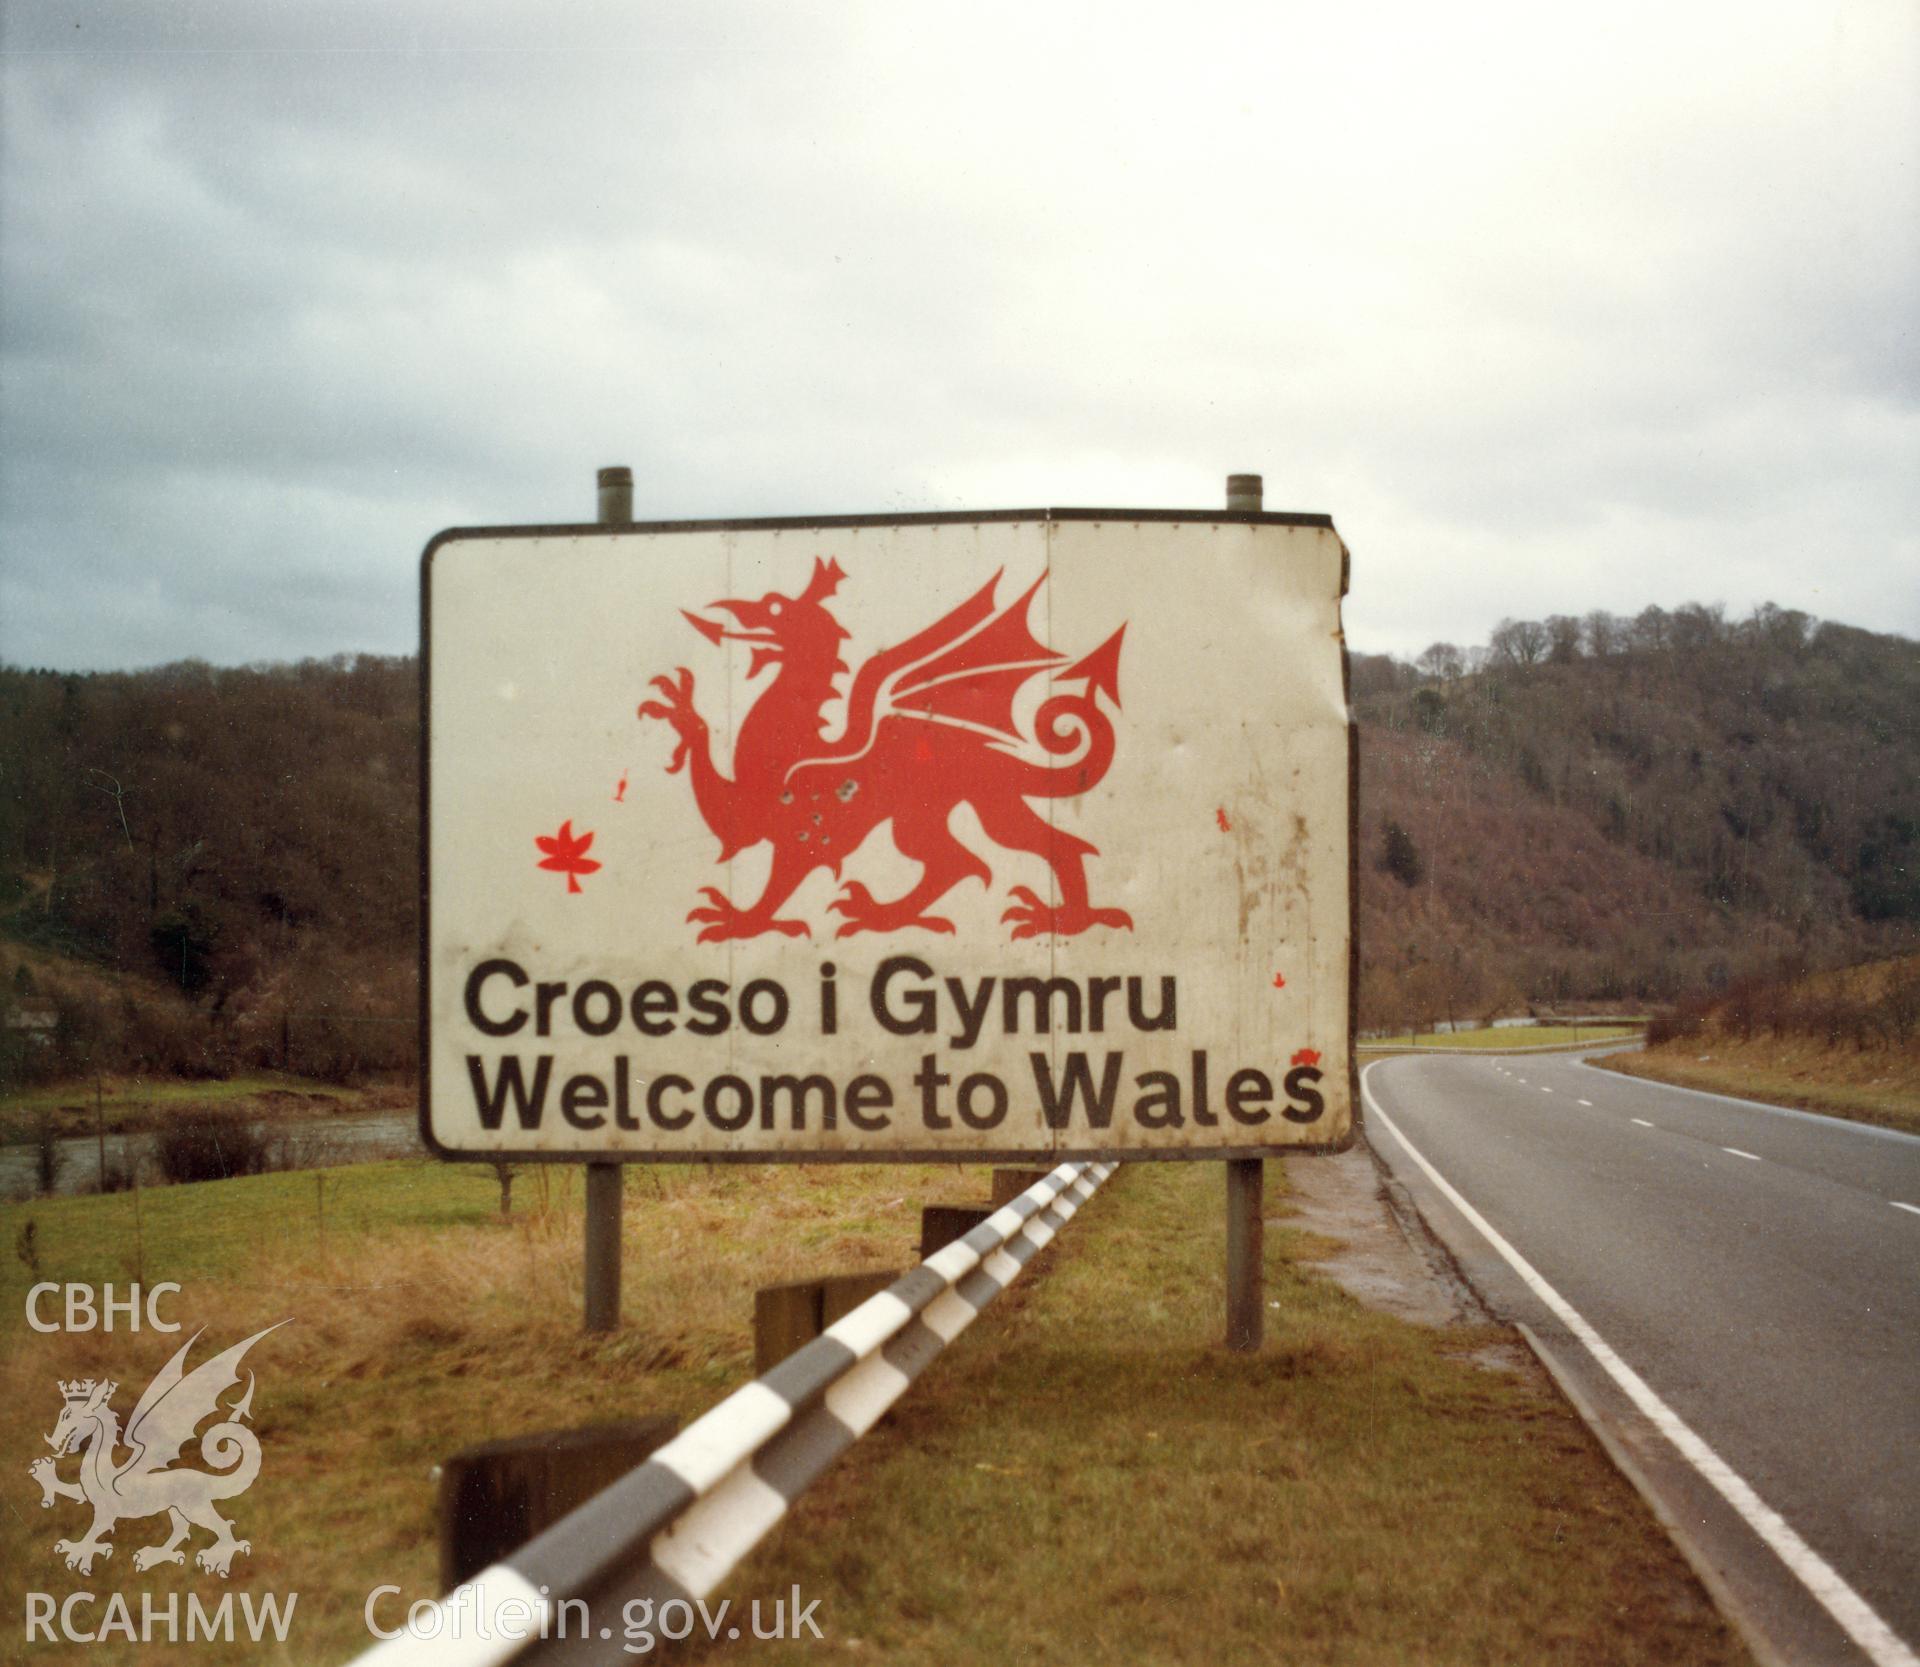 Colour photograph (large contact print) showing bilingual 'Croeso i Gymru / Welcome to Wales' sign; collated by the former Central Office of Information.